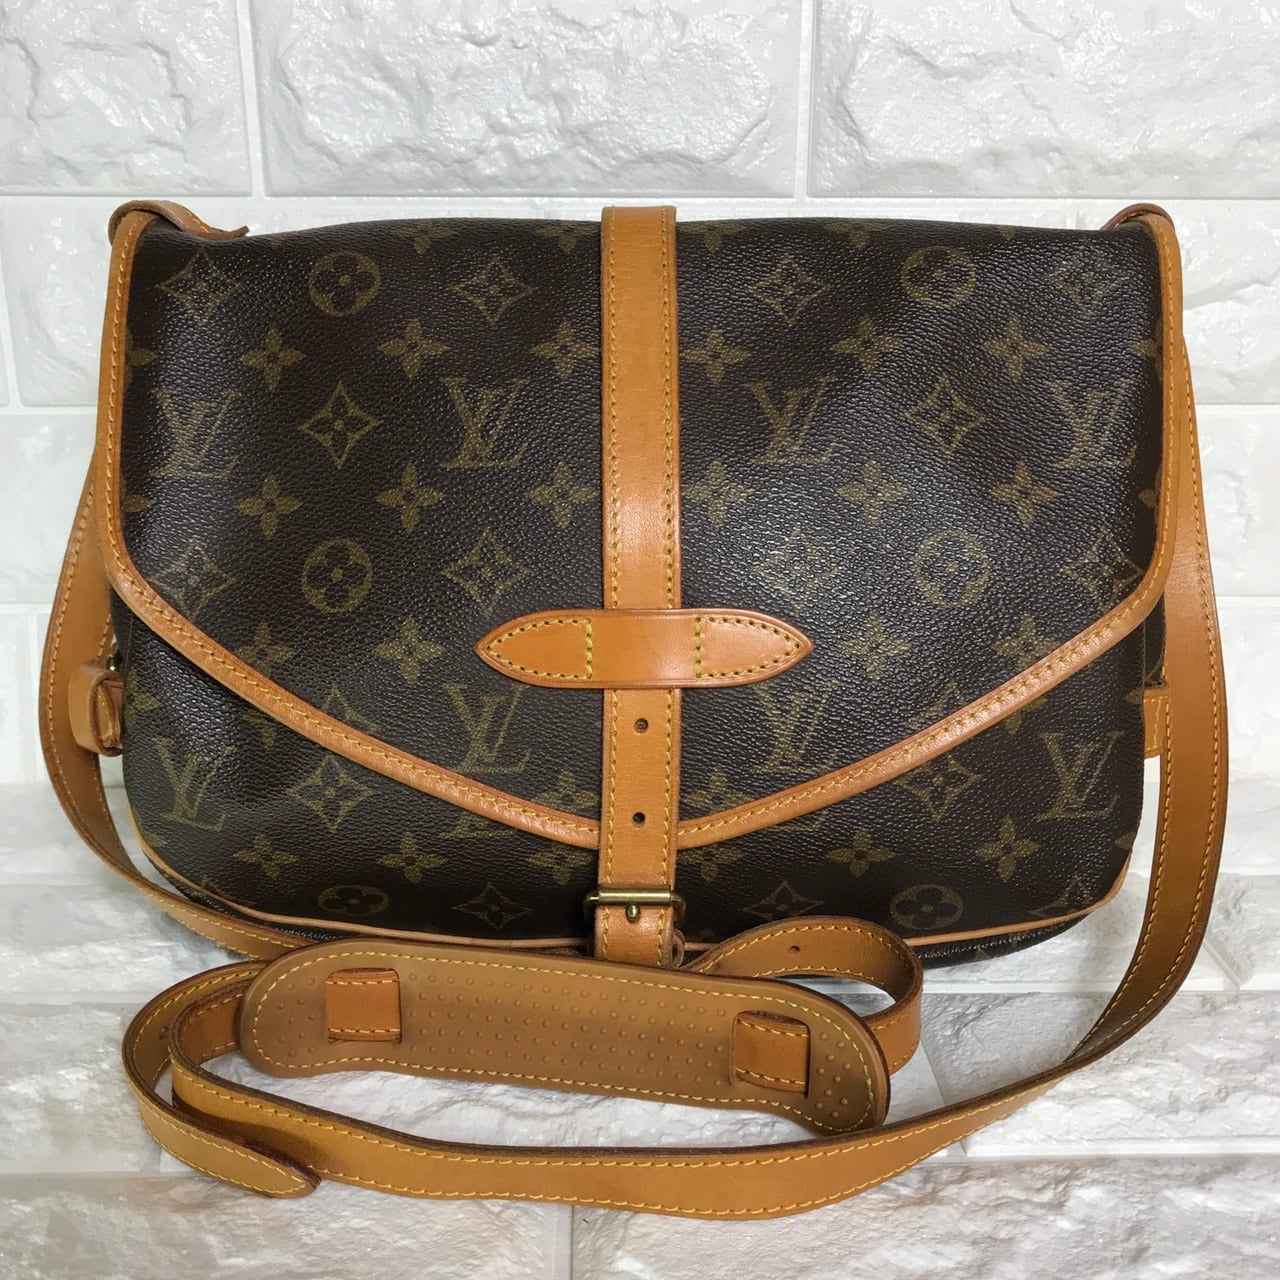 LOUIS VUITTON ルイヴィトン モノグラム ソミュール30 ショルダーバッグ | Unique Brand  Shop《ルイヴィトン多数出品中》 powered by BASE